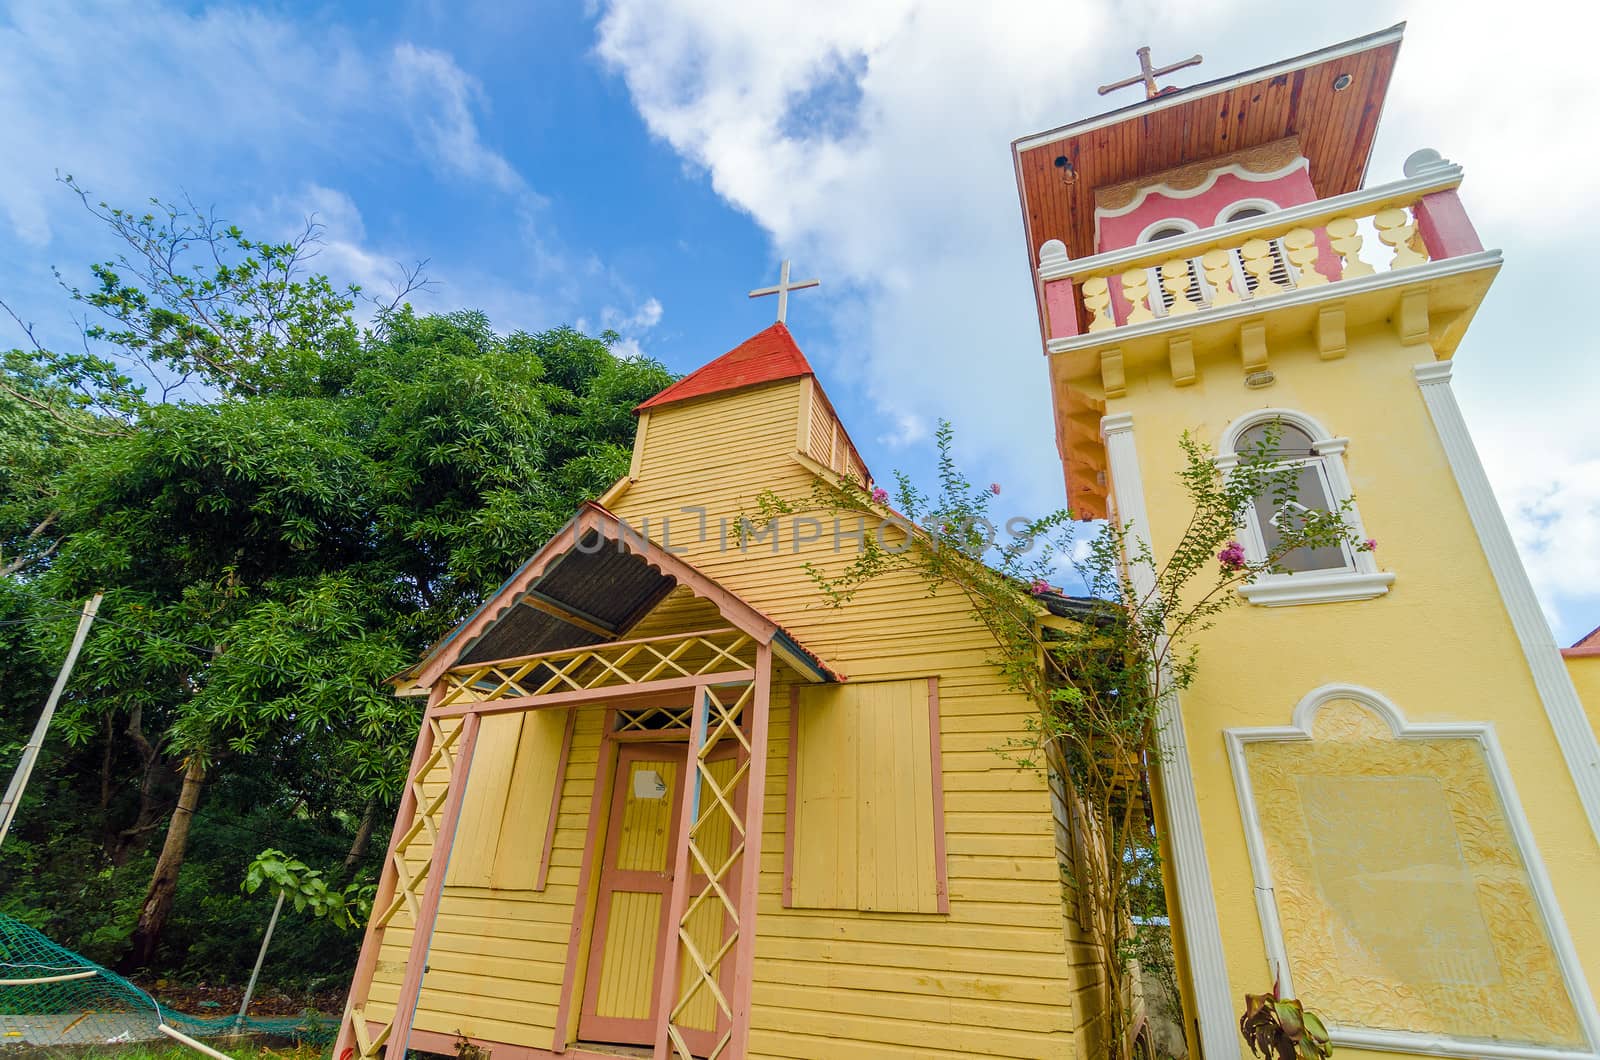 Yellow and pink church on the Caribbean island of San Andres y Providencia, Colombia